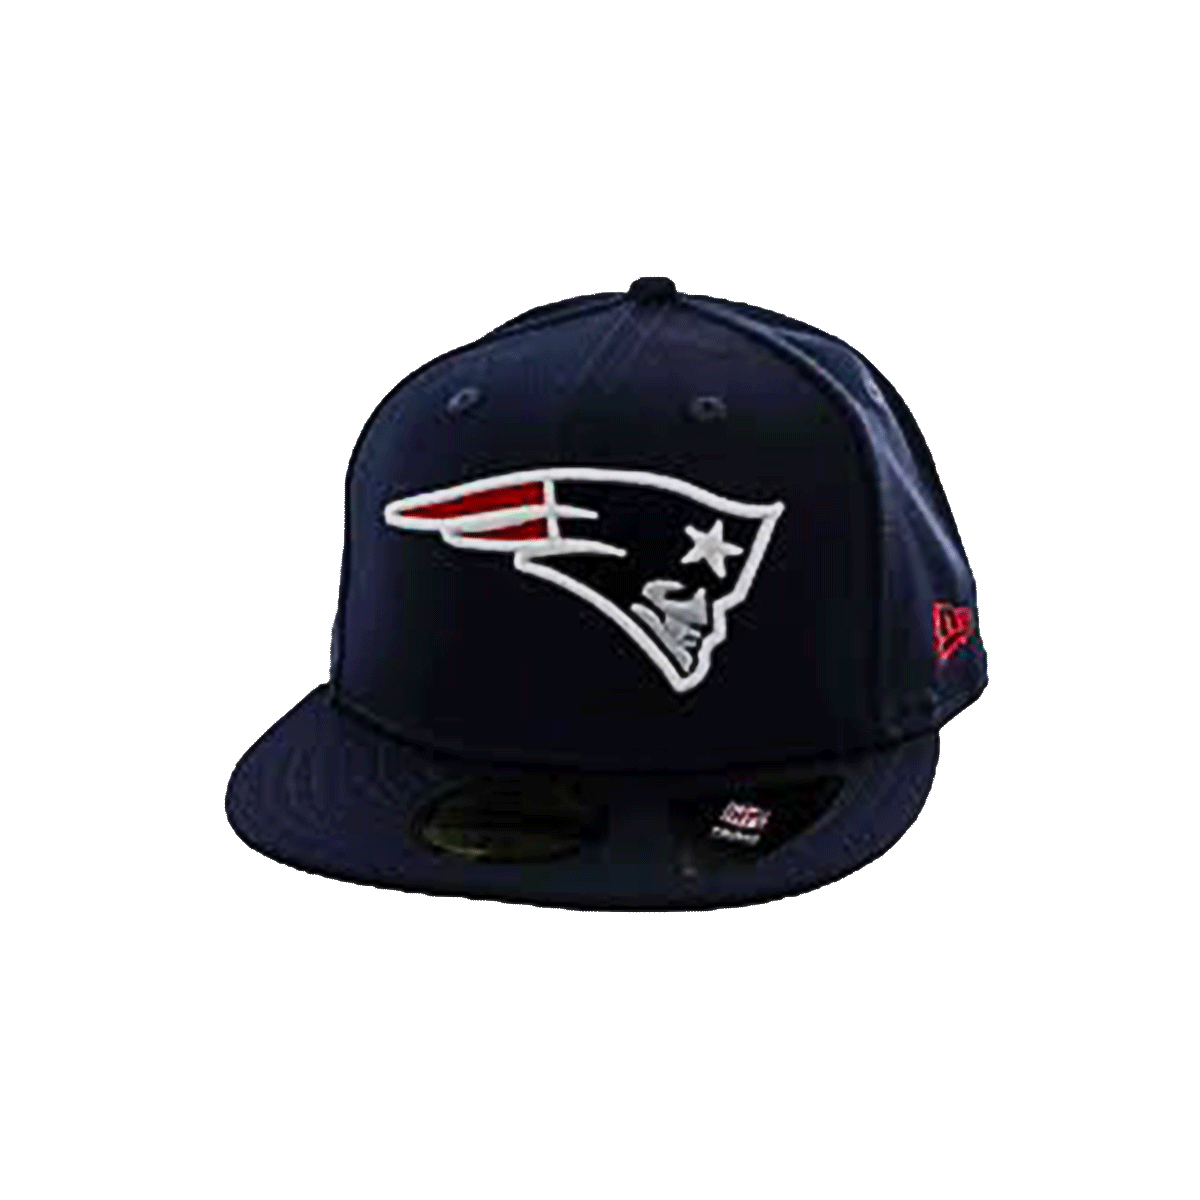 KAPA NFL FITTED TRAINER NEEPAT Fitted